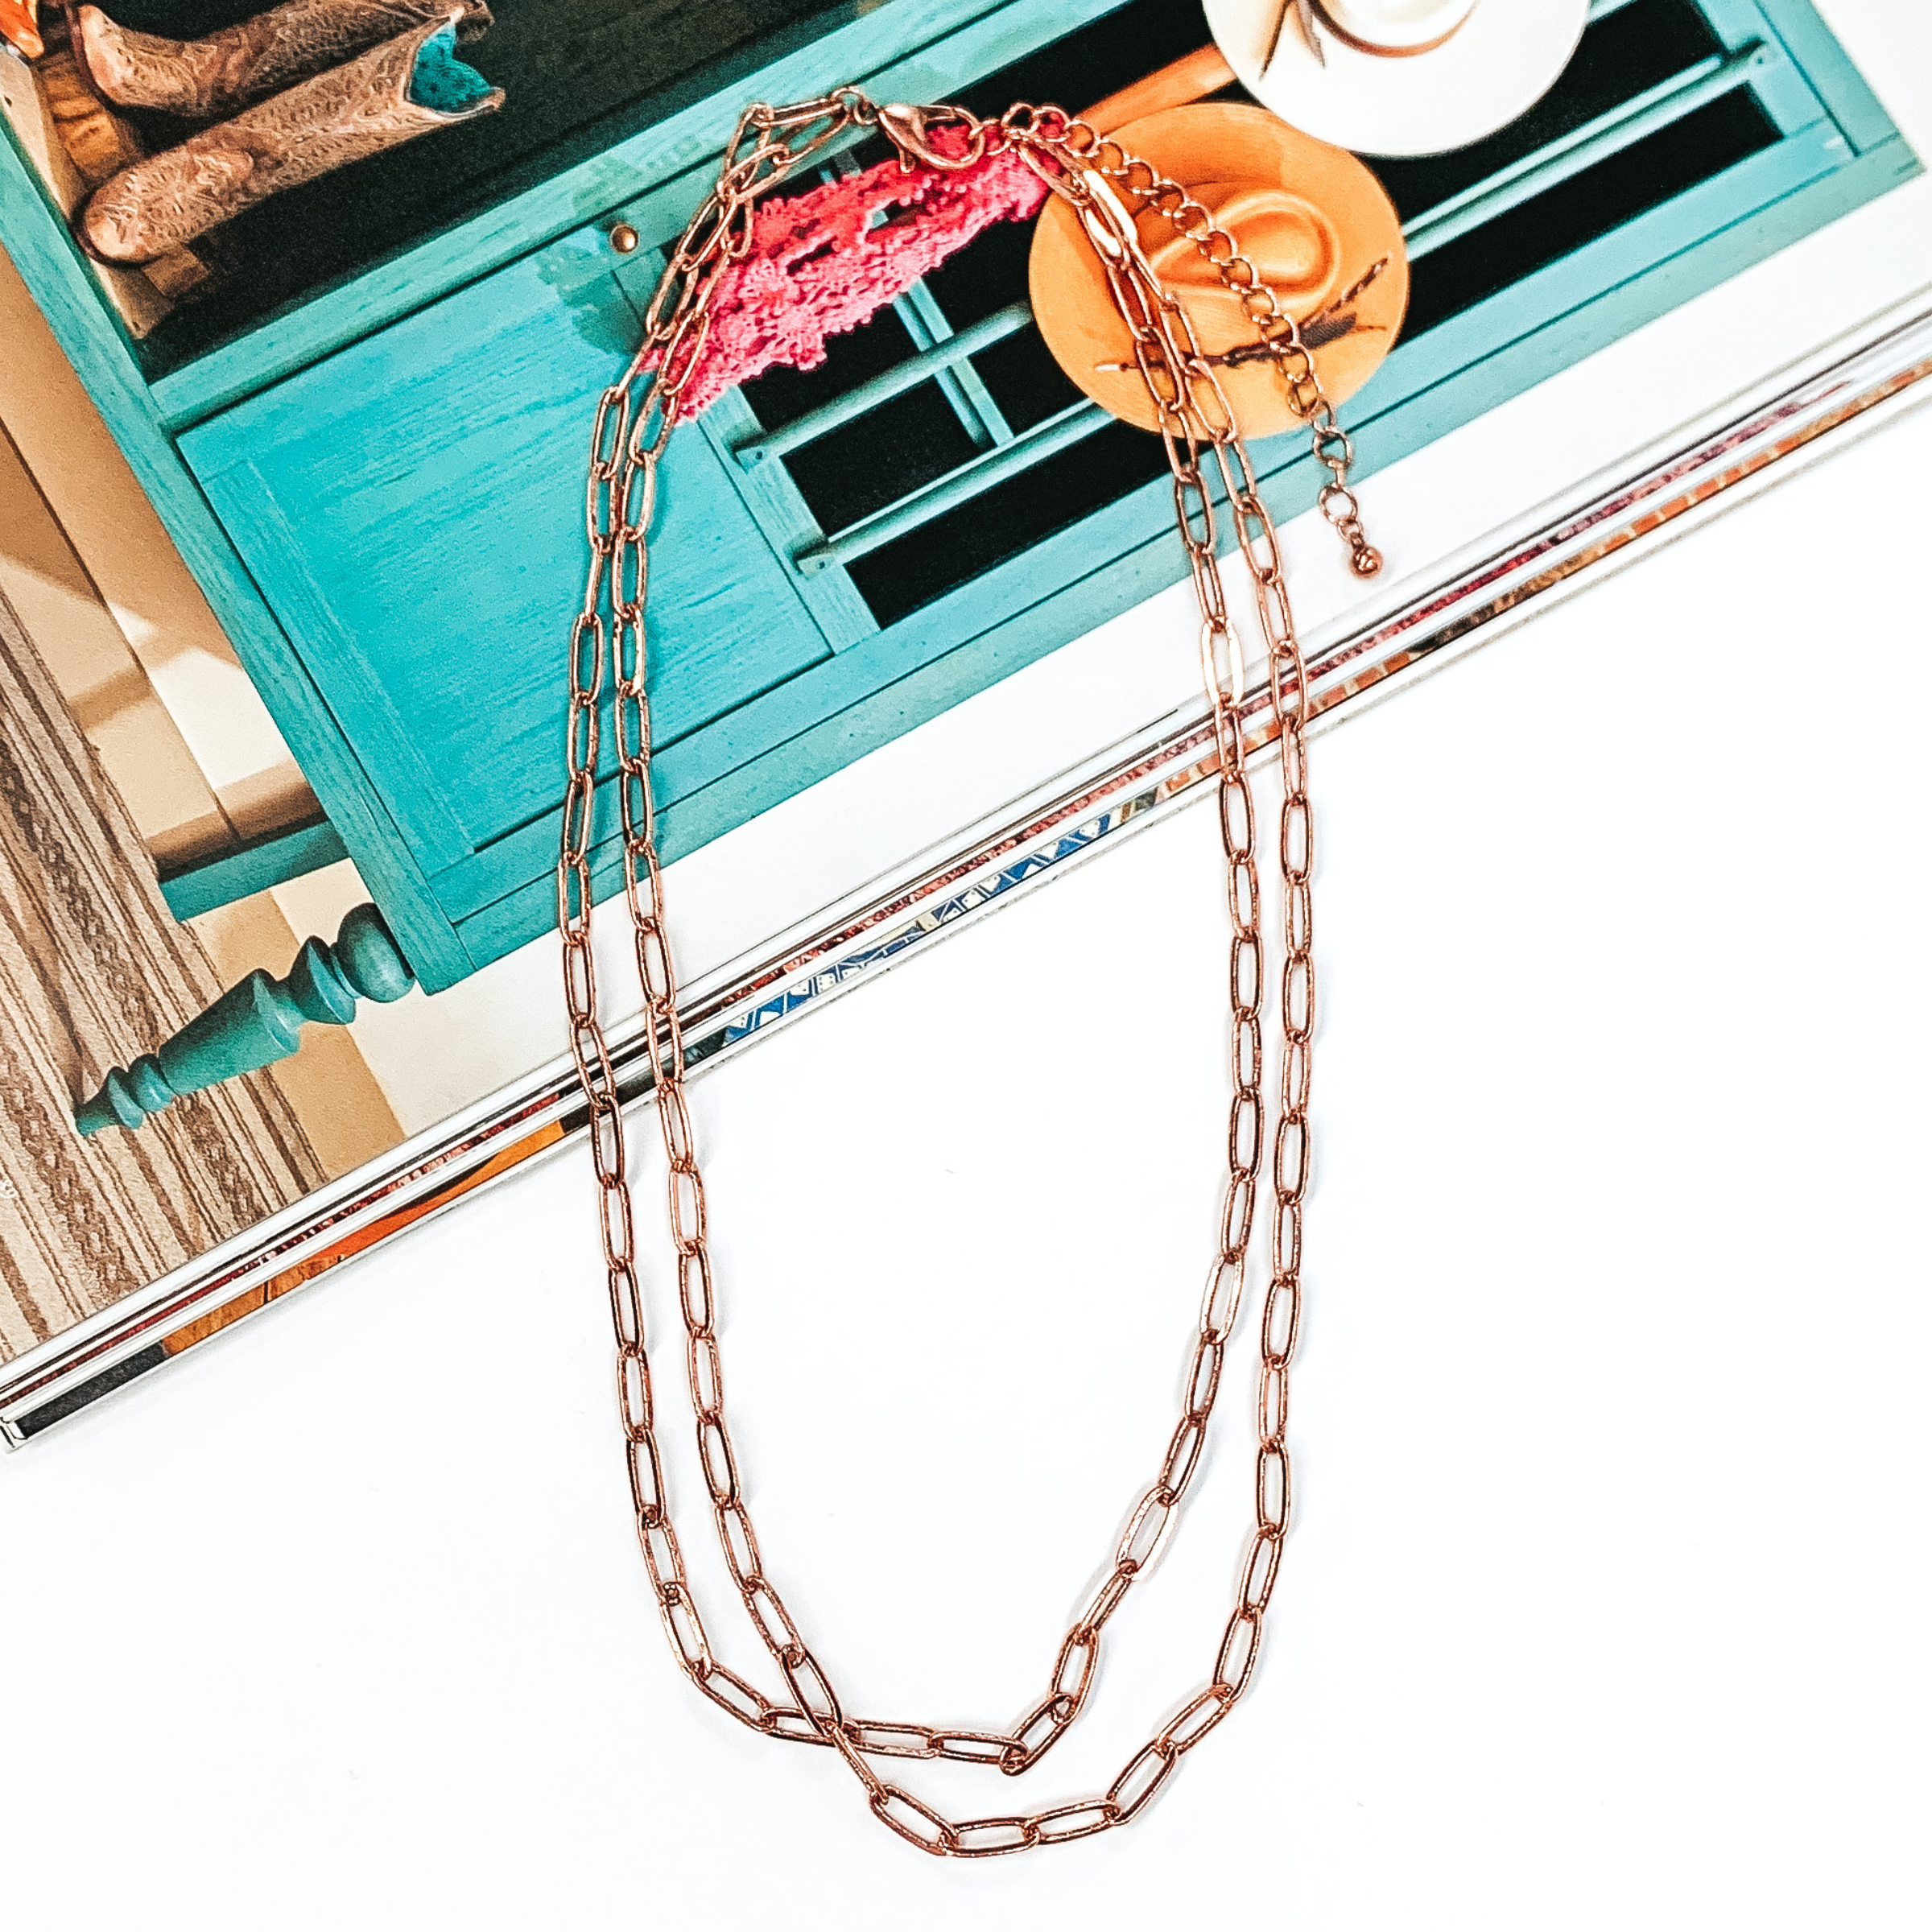 Copper layered paperclip chain necklace that is pictured half on a magazine and half on a white background.